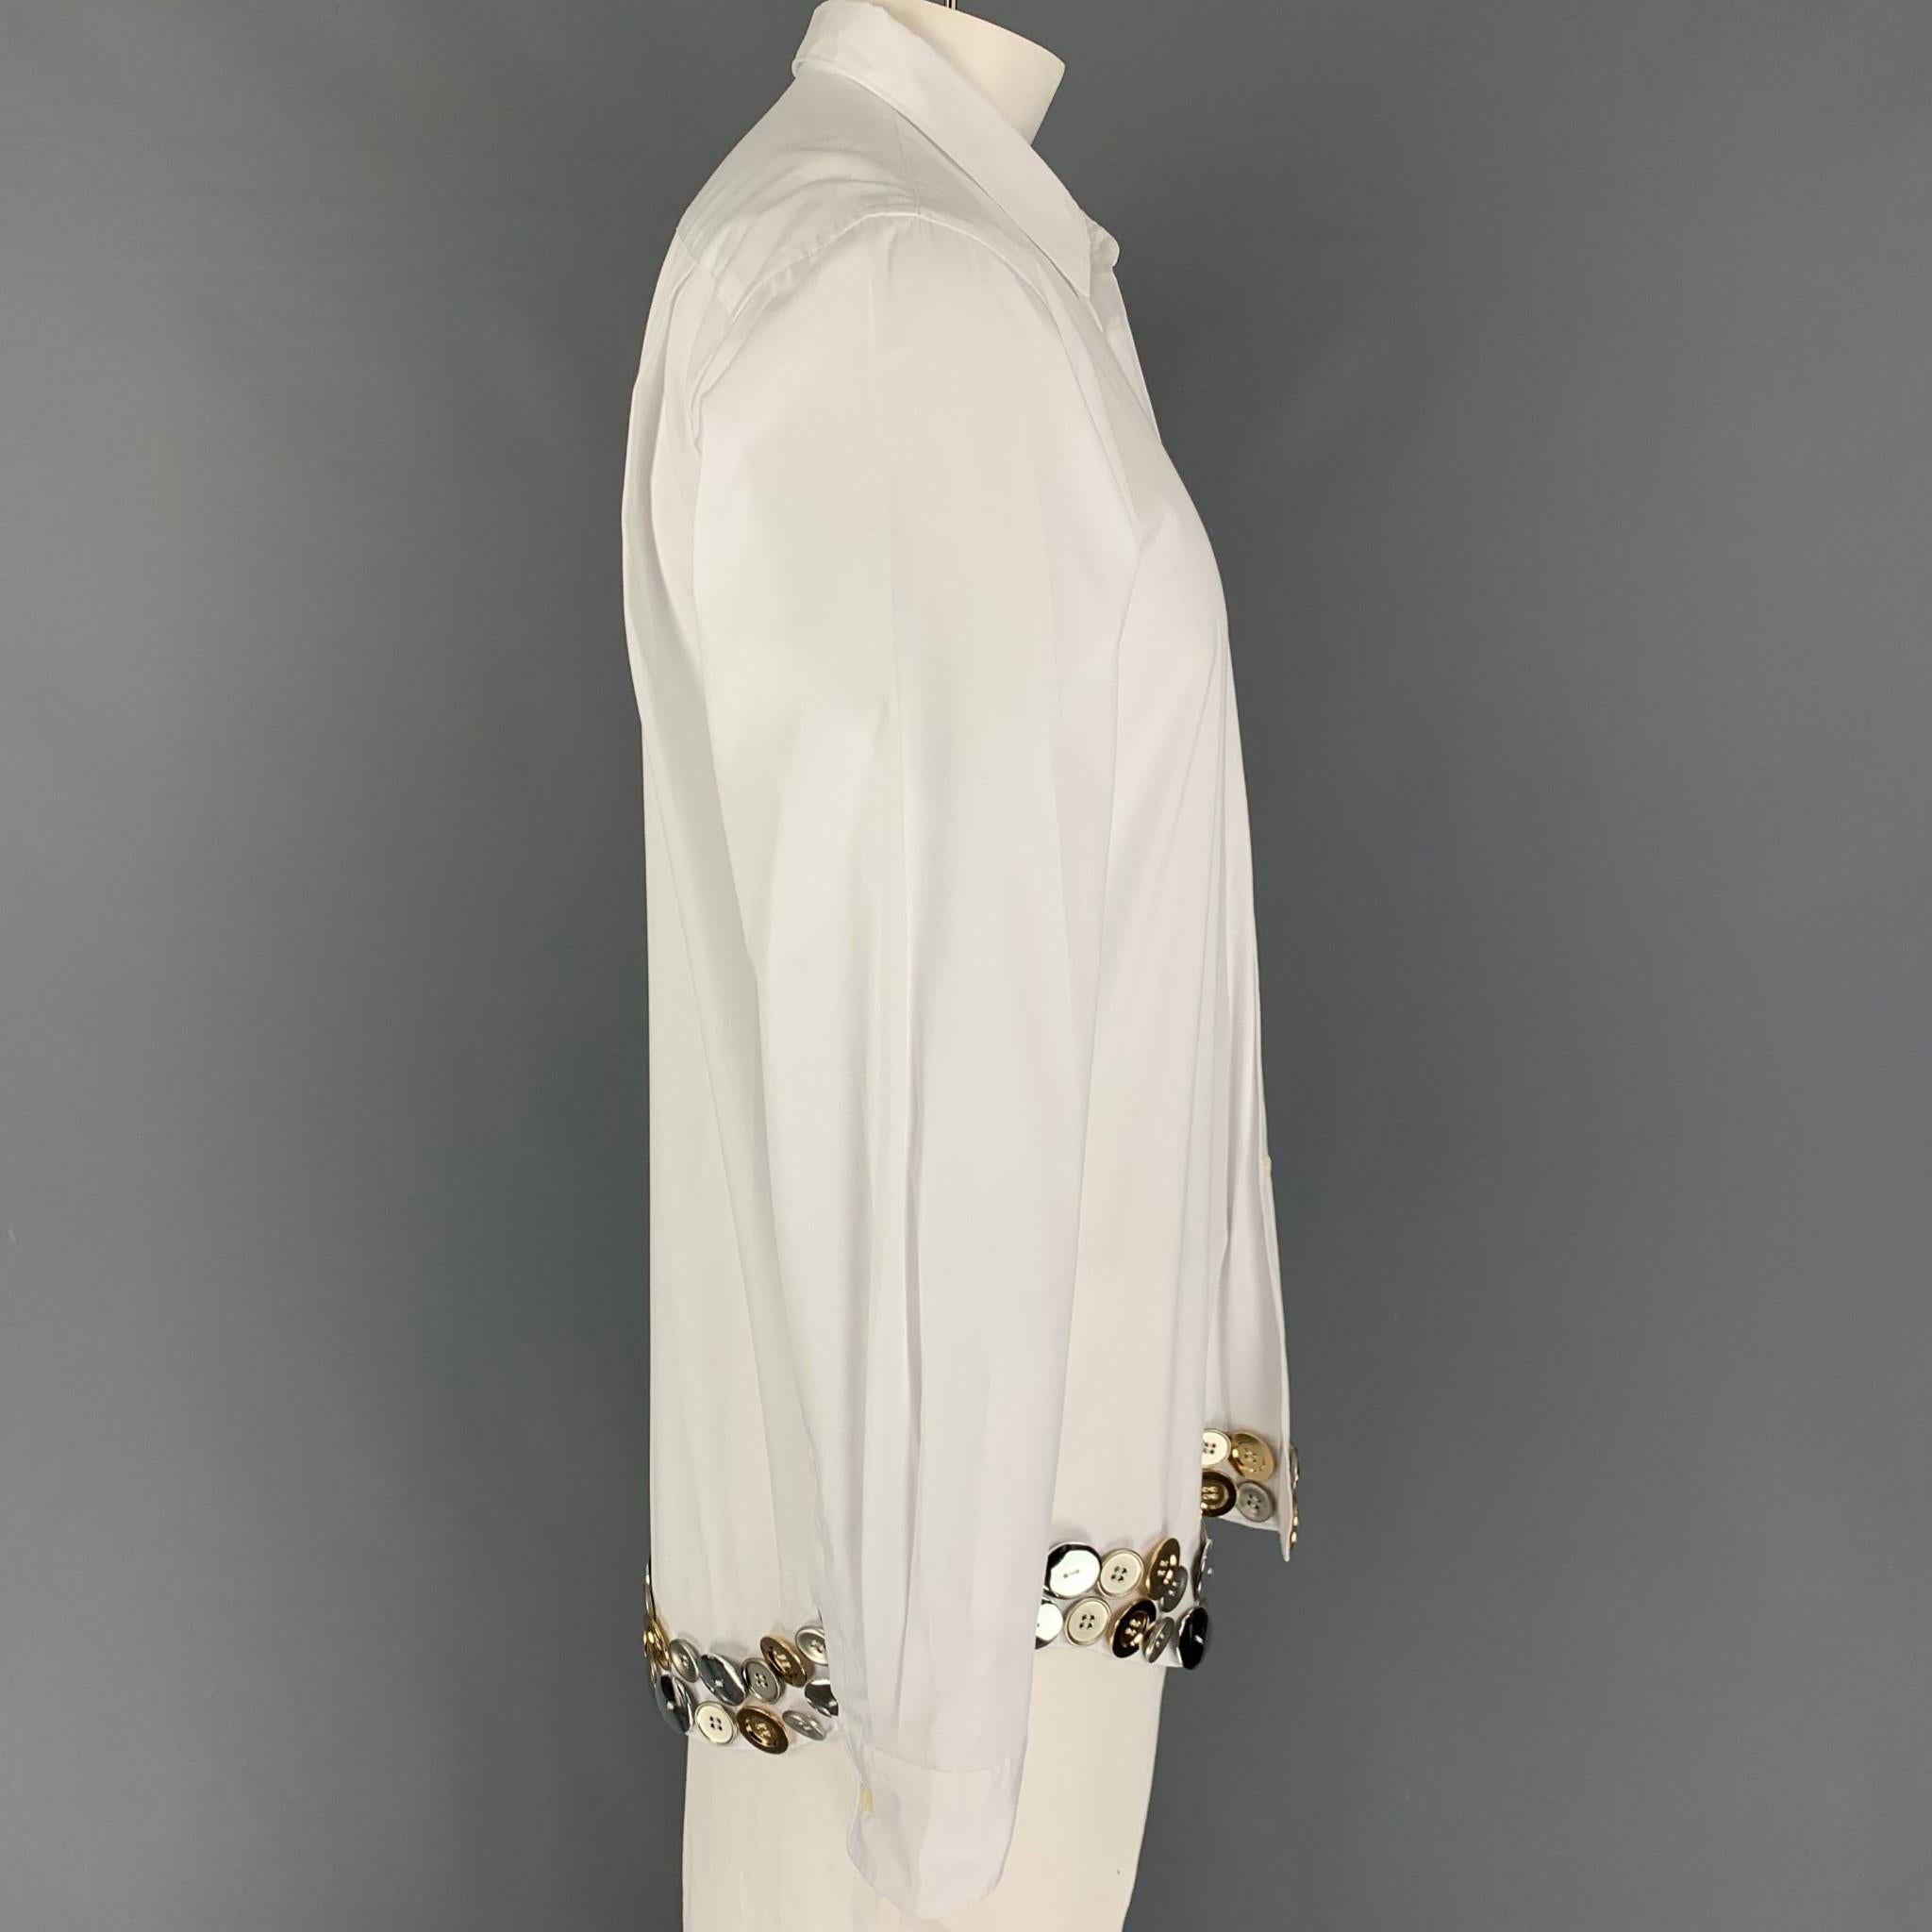 COMME des GARCONS HOMME PLUS long sleeve shirt comes in a white cotton featuring metal button details, patch pocket, spread collar, and a button up closure. Made in Japan. 

New With Tags. 
Marked: L

Measurements:

Shoulder: 19.5 in.
Chest: 42